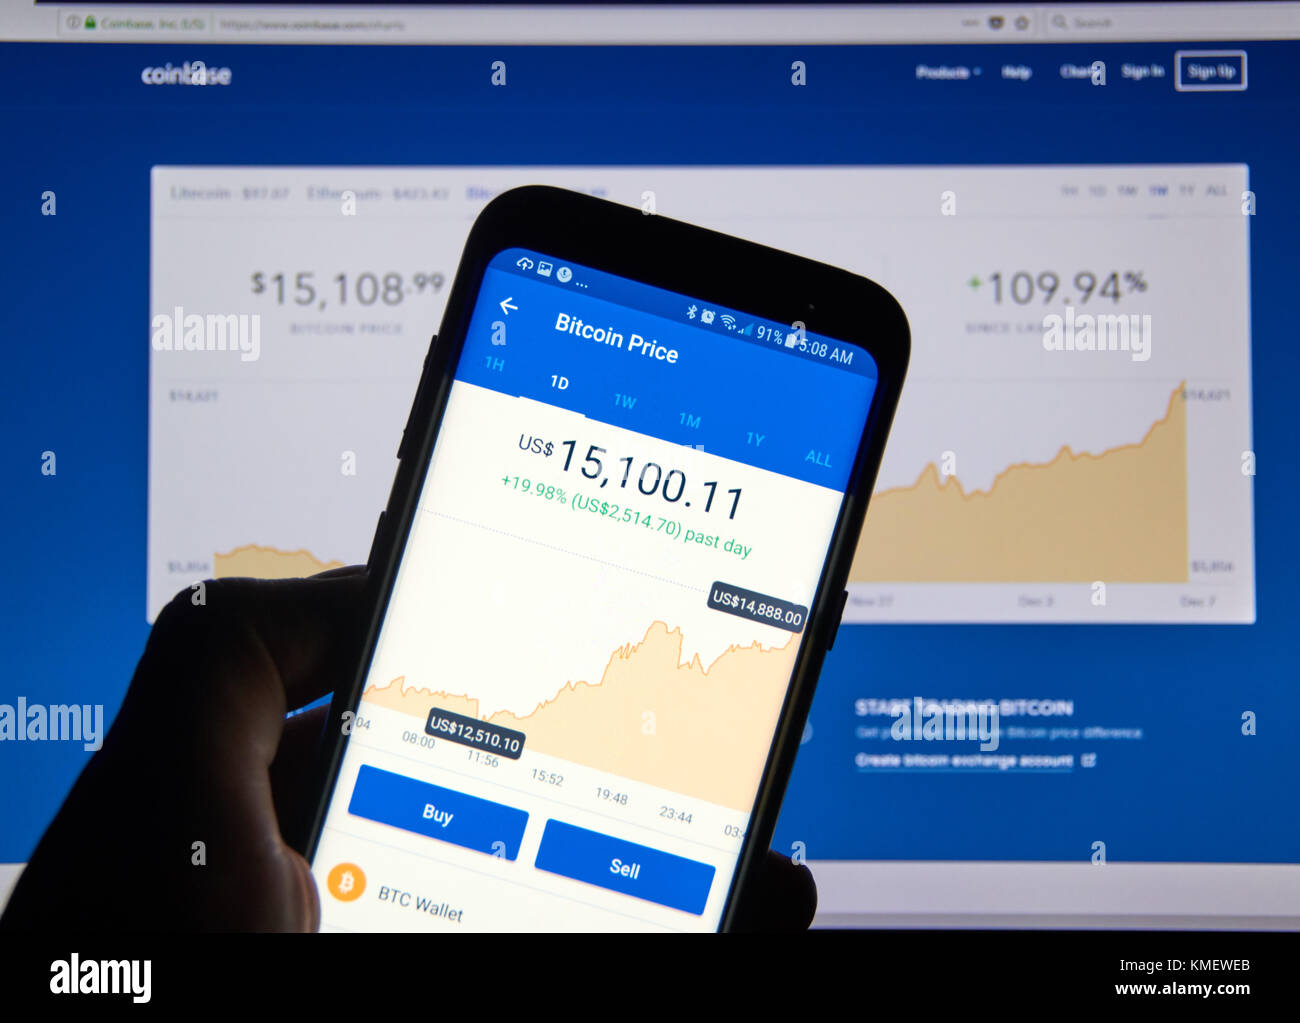 MONTREAL, CANADA - DECEMBER 7, 2017: Bitcoin USD price on Coinbase android app. Coinbase is a digital asset broker headquartered in San Francisco, Cal Stock Photo